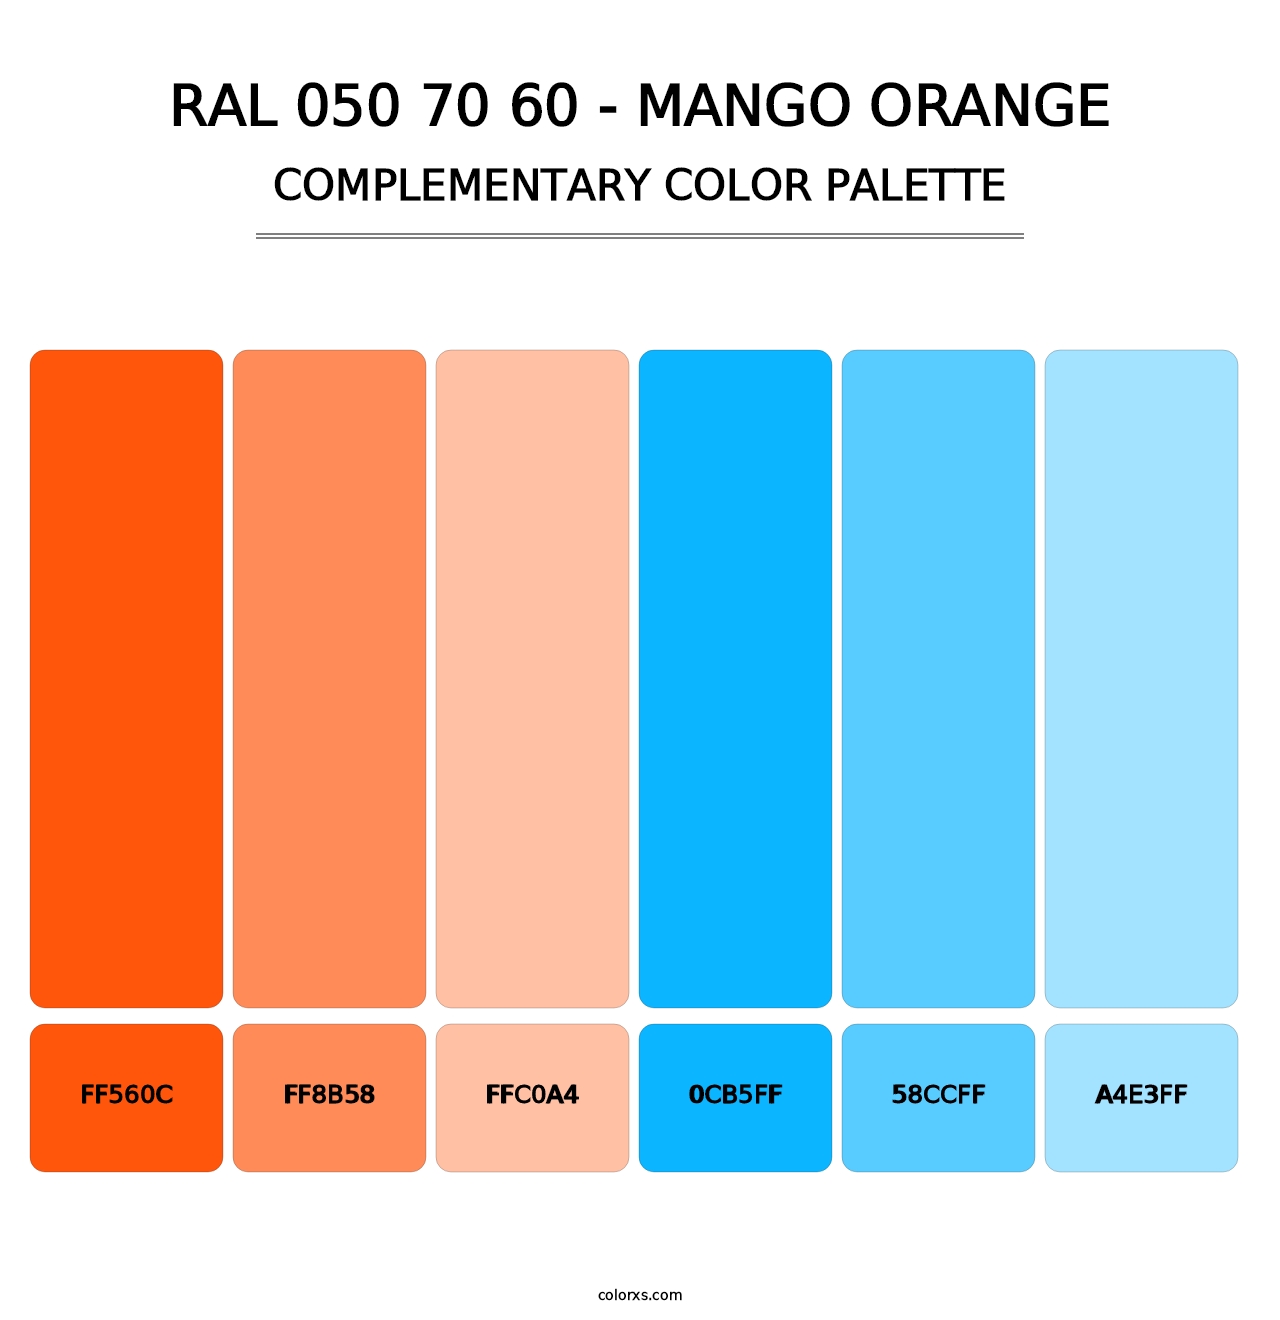 RAL 050 70 60 - Mango Orange - Complementary Color Palette